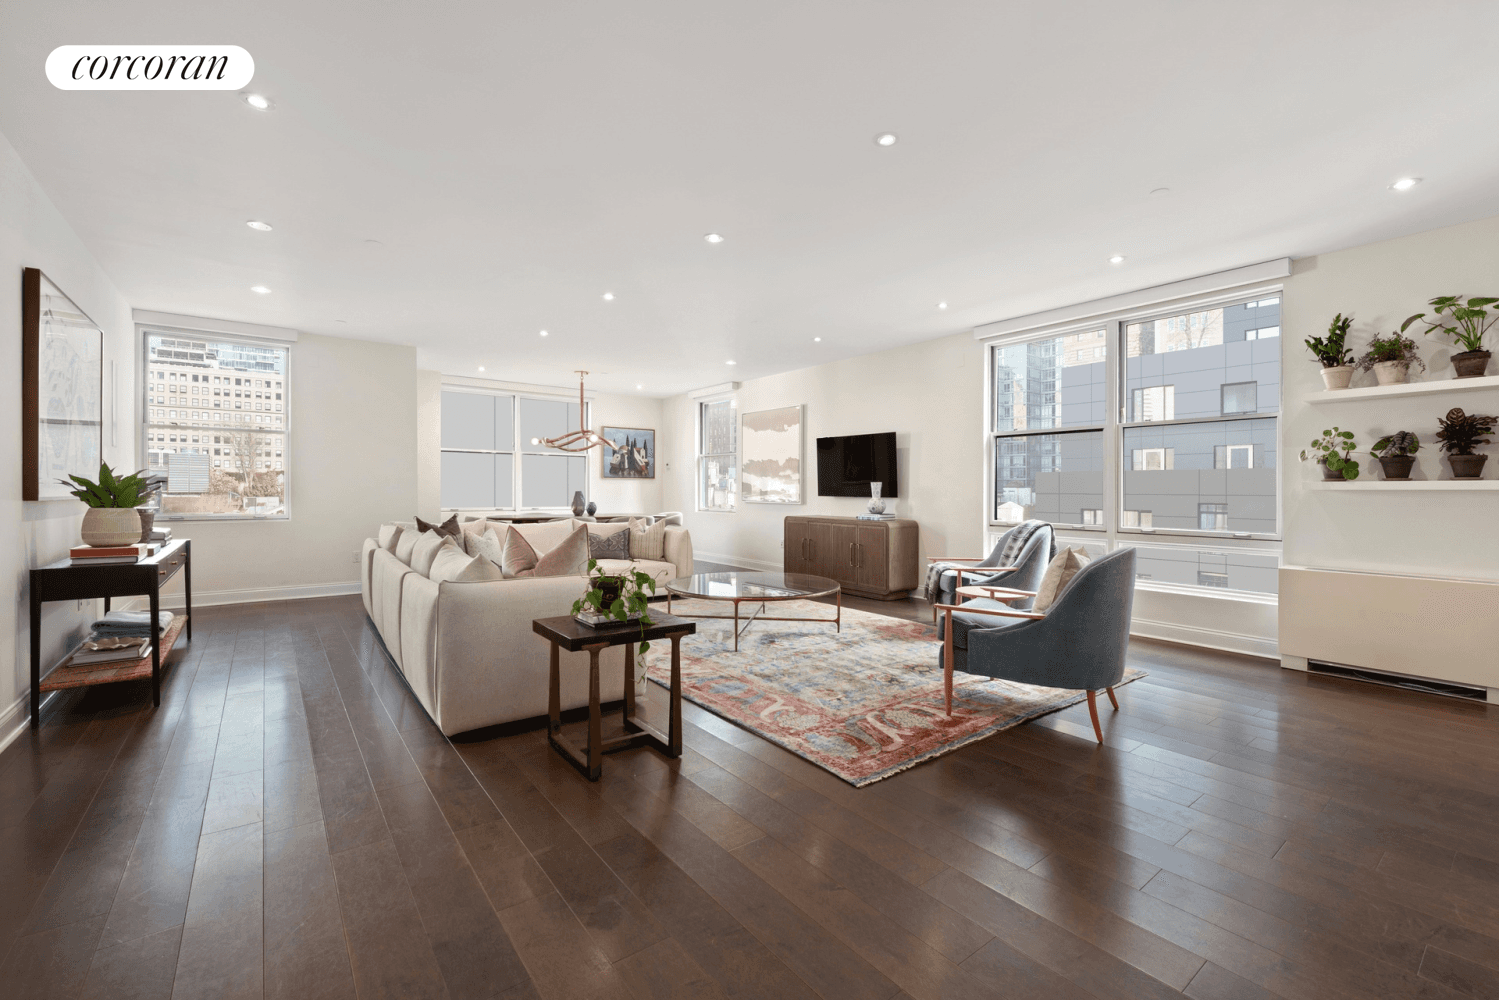 You'll want to move right into this beautifully updated and sun drenched convertible three bedroom, two bathroom corner condominium featuring mesmerizing skyline views, chic designer finishes, excellent storage and an ...